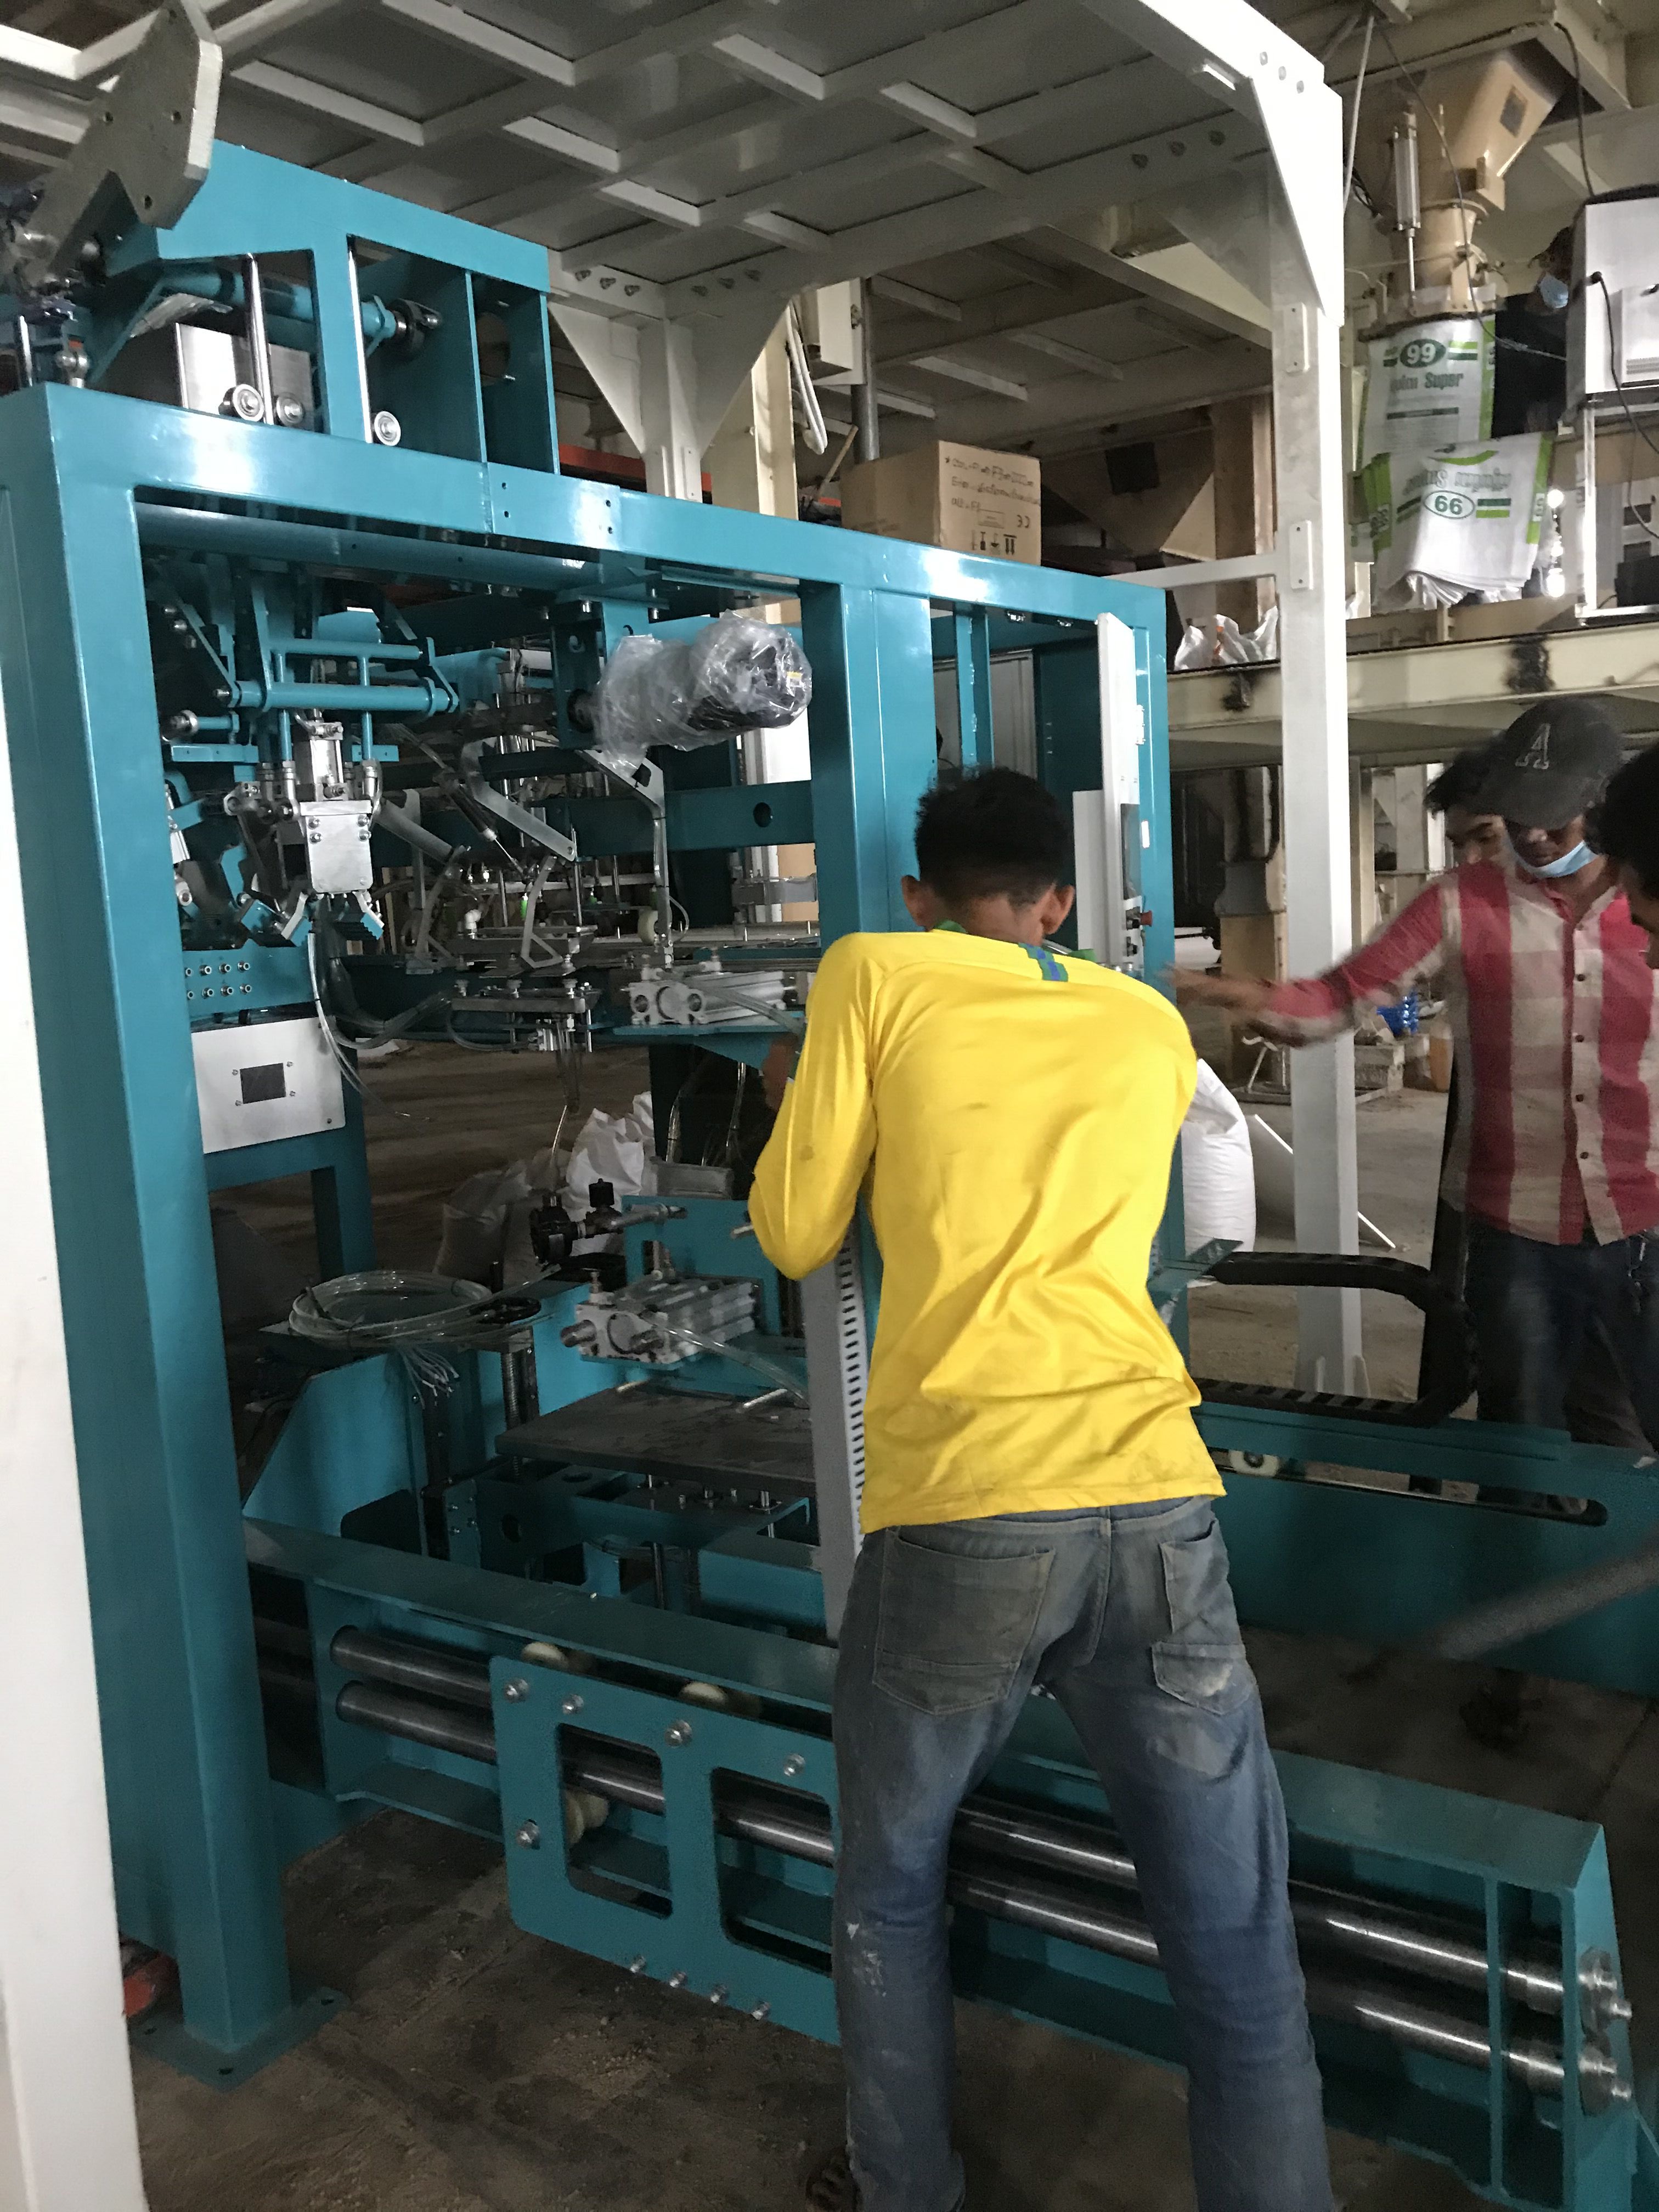 Soybean Fertilizer bagging machine Automated Bagging Line Fully Automatic Packing Palletizing Line, Fully Automatic Packing Line, Fully Automatic Bagging Line, Fully Automatic filling and packaging li